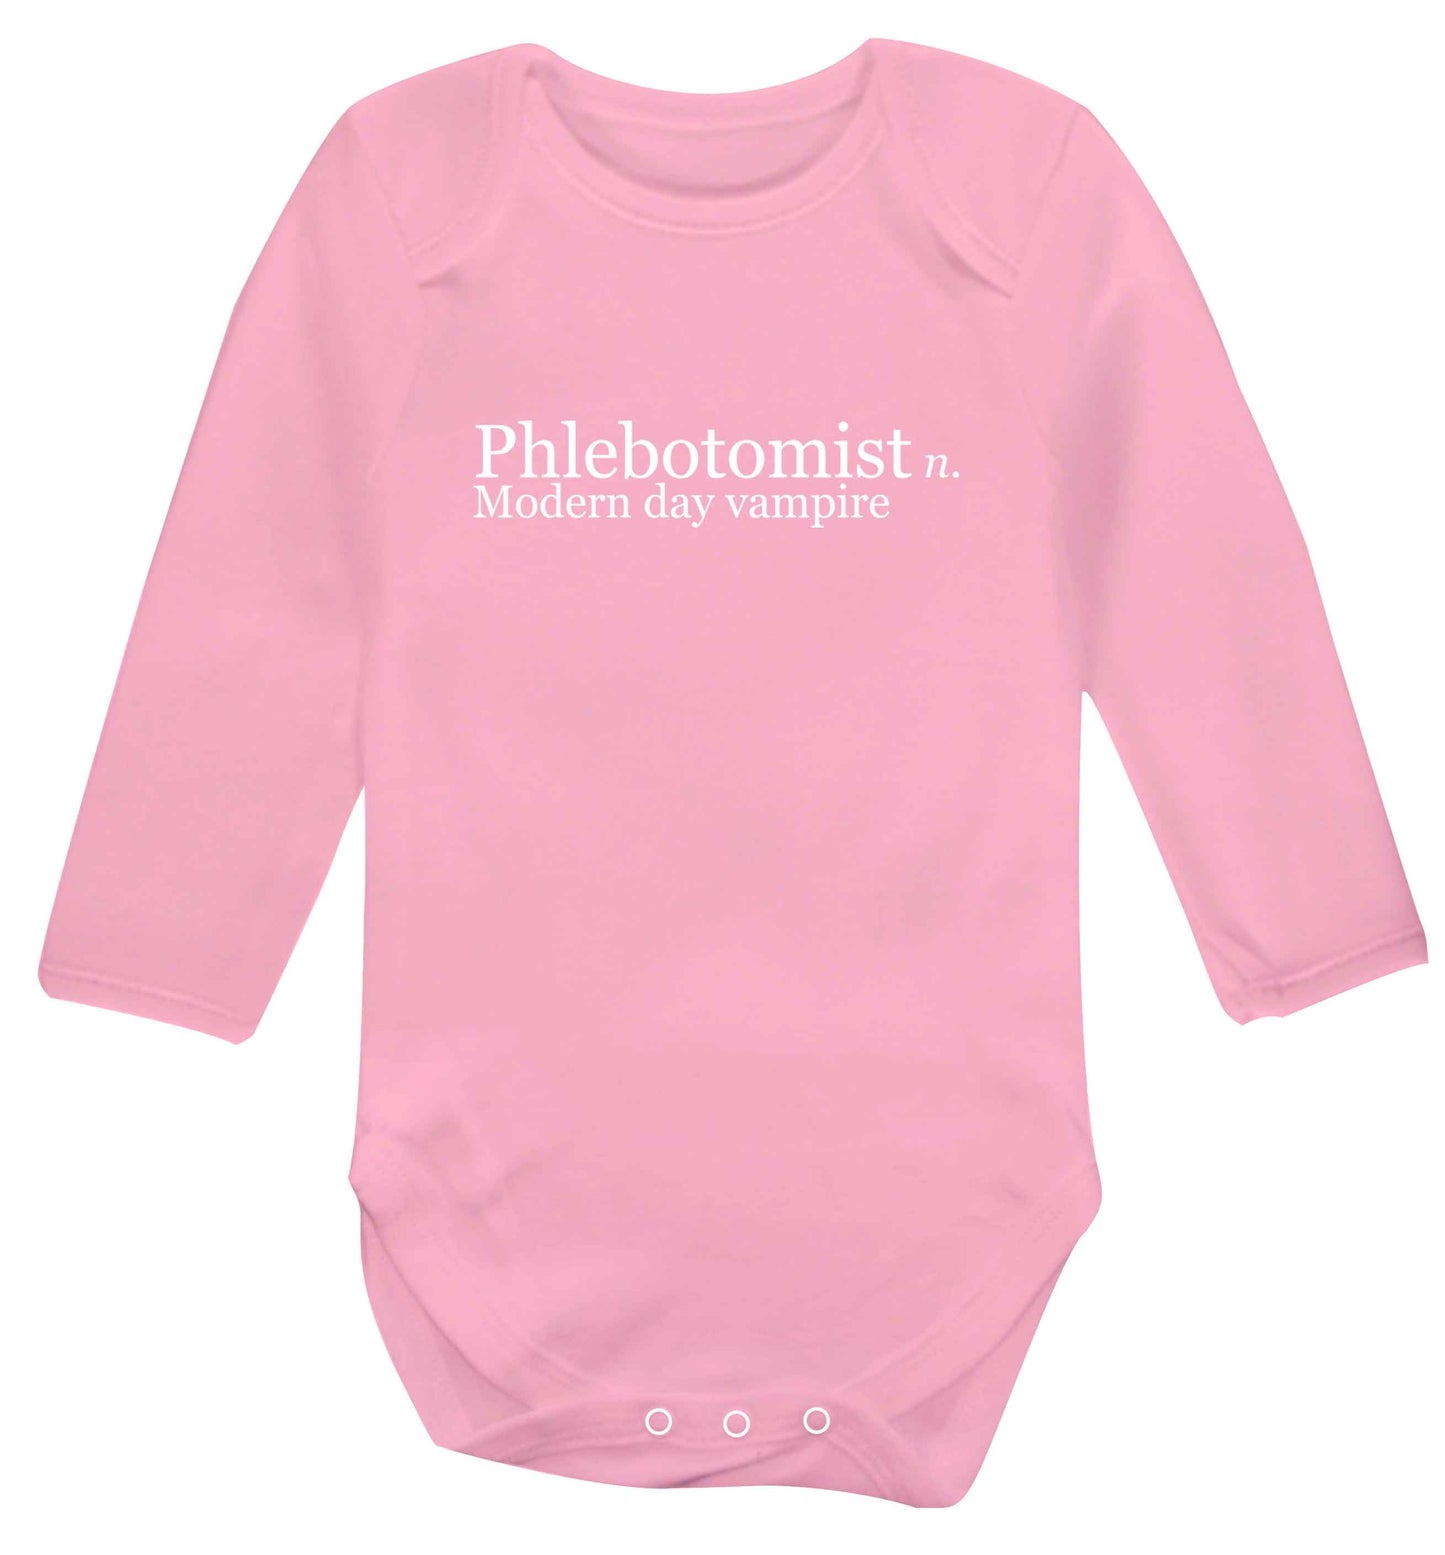 Phlebotomist - Modern day vampire baby vest long sleeved pale pink 6-12 months